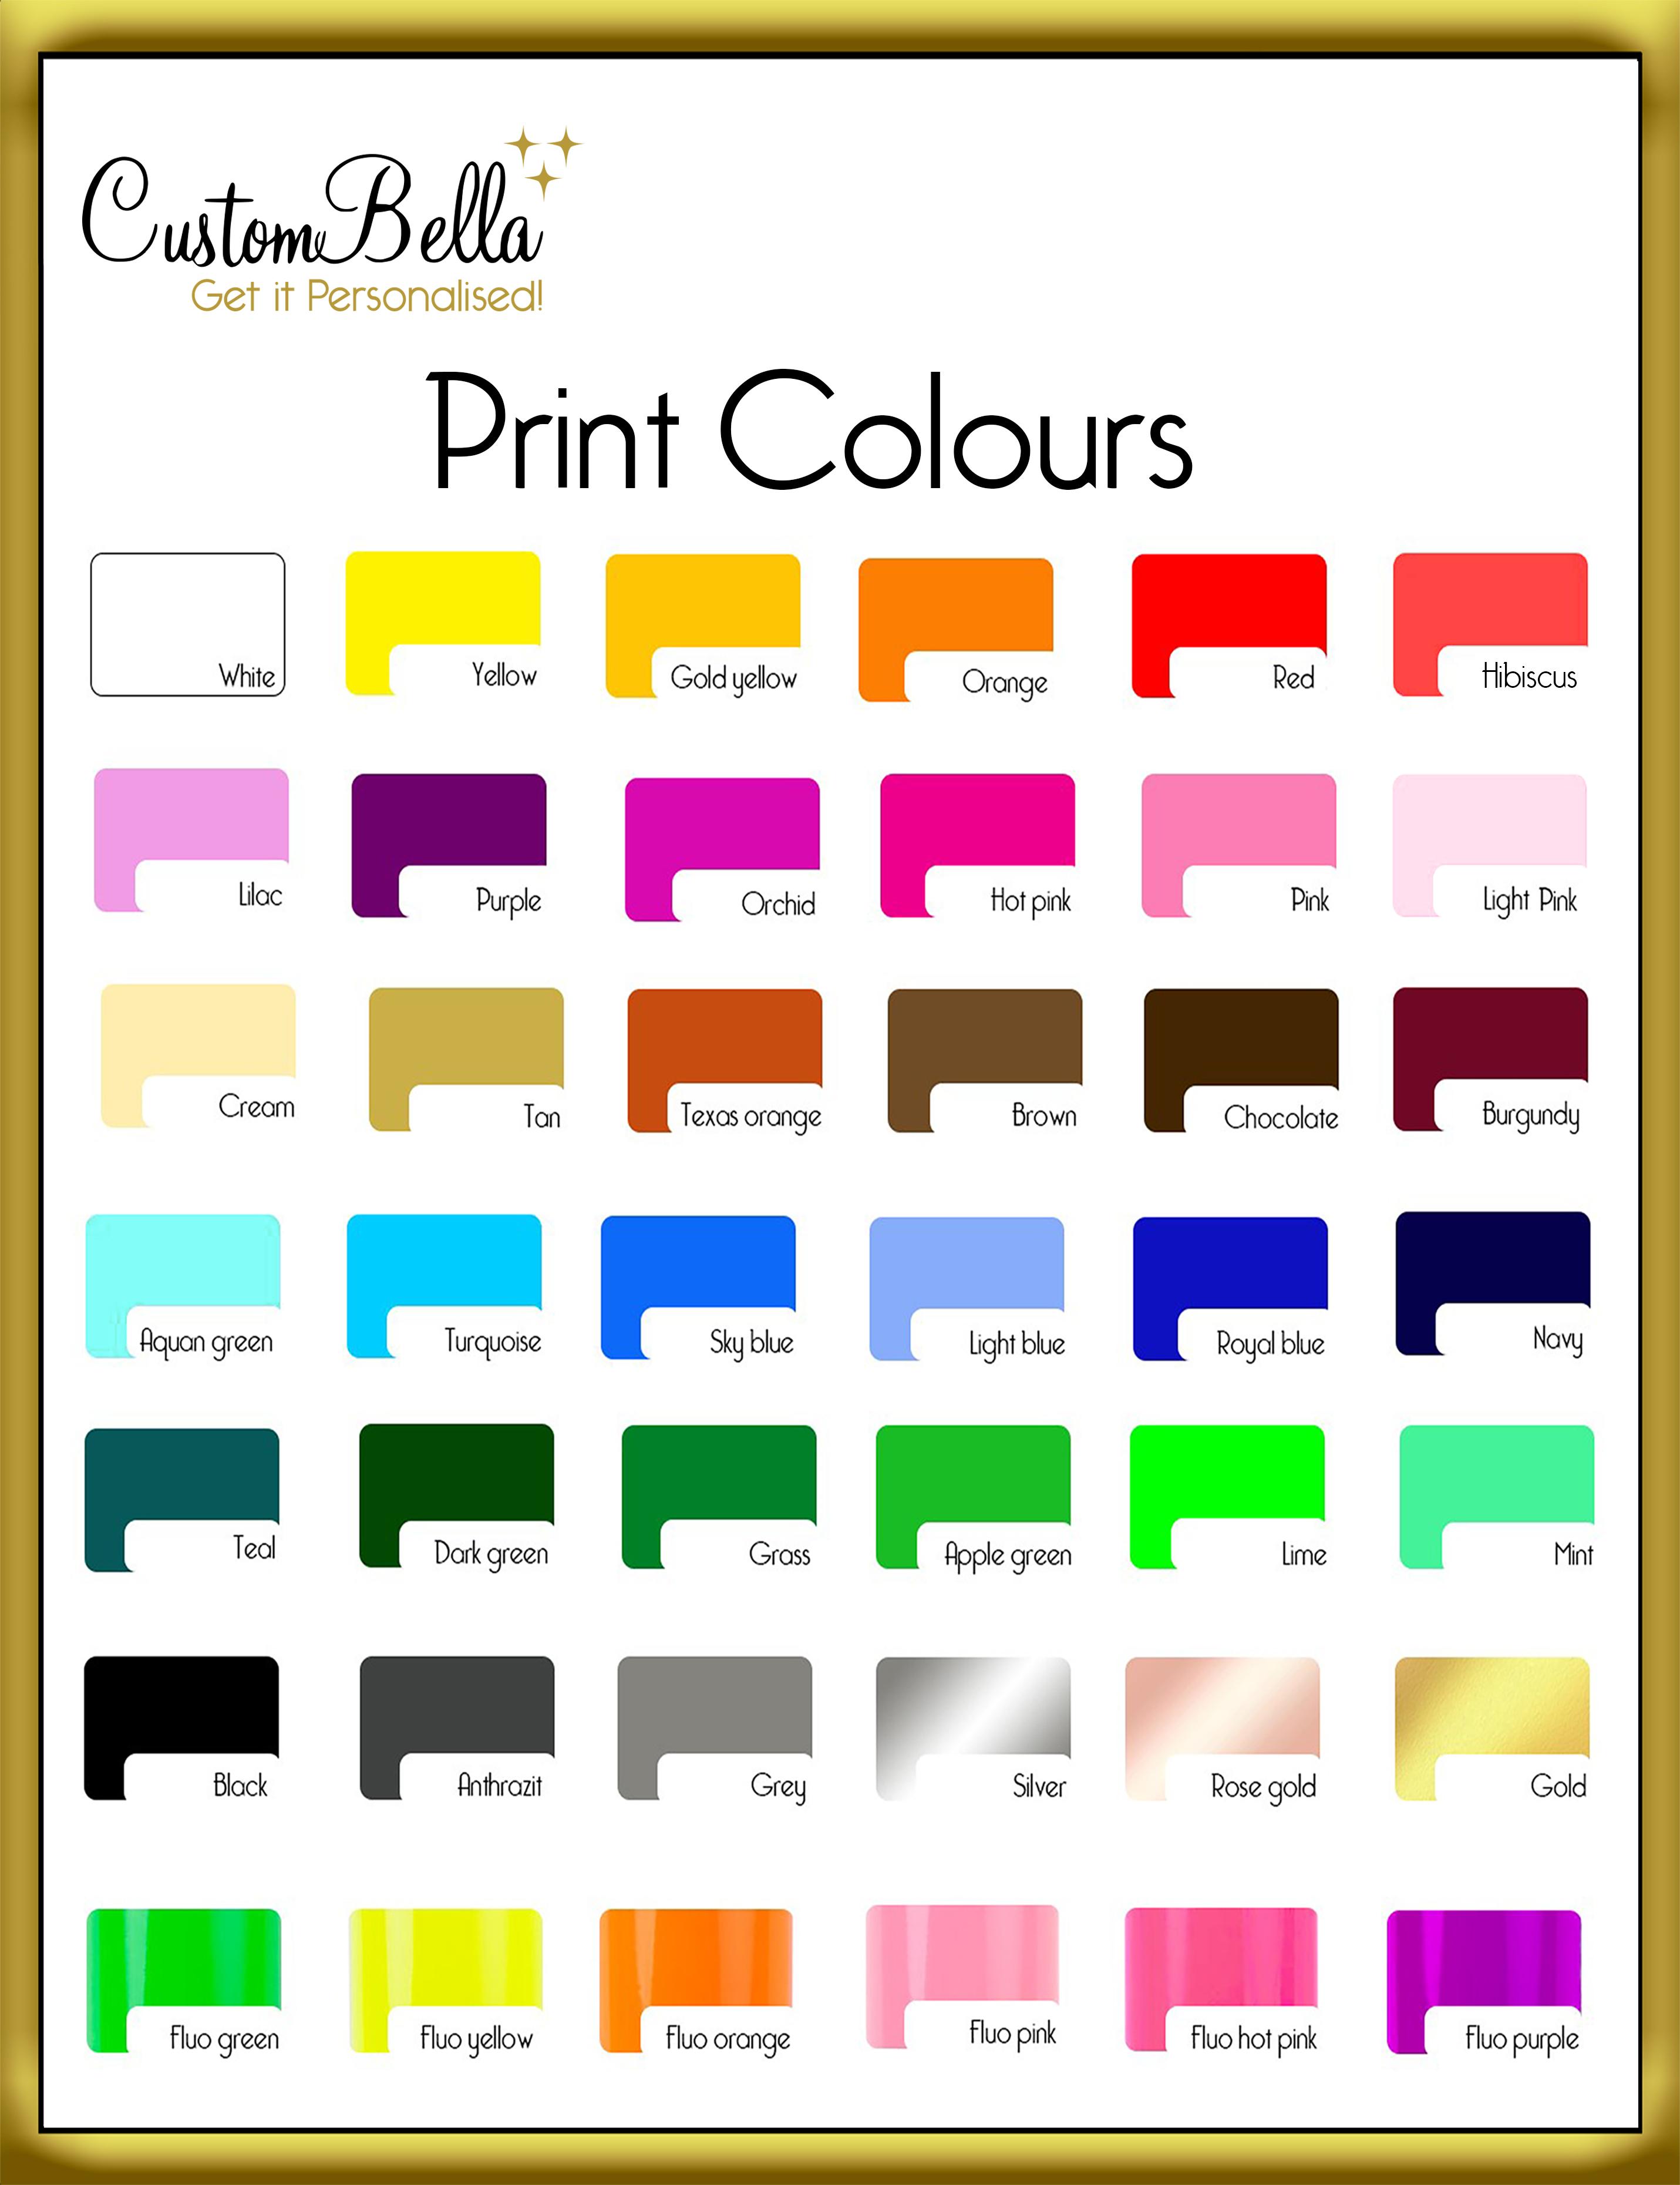 Custombella print colours to select